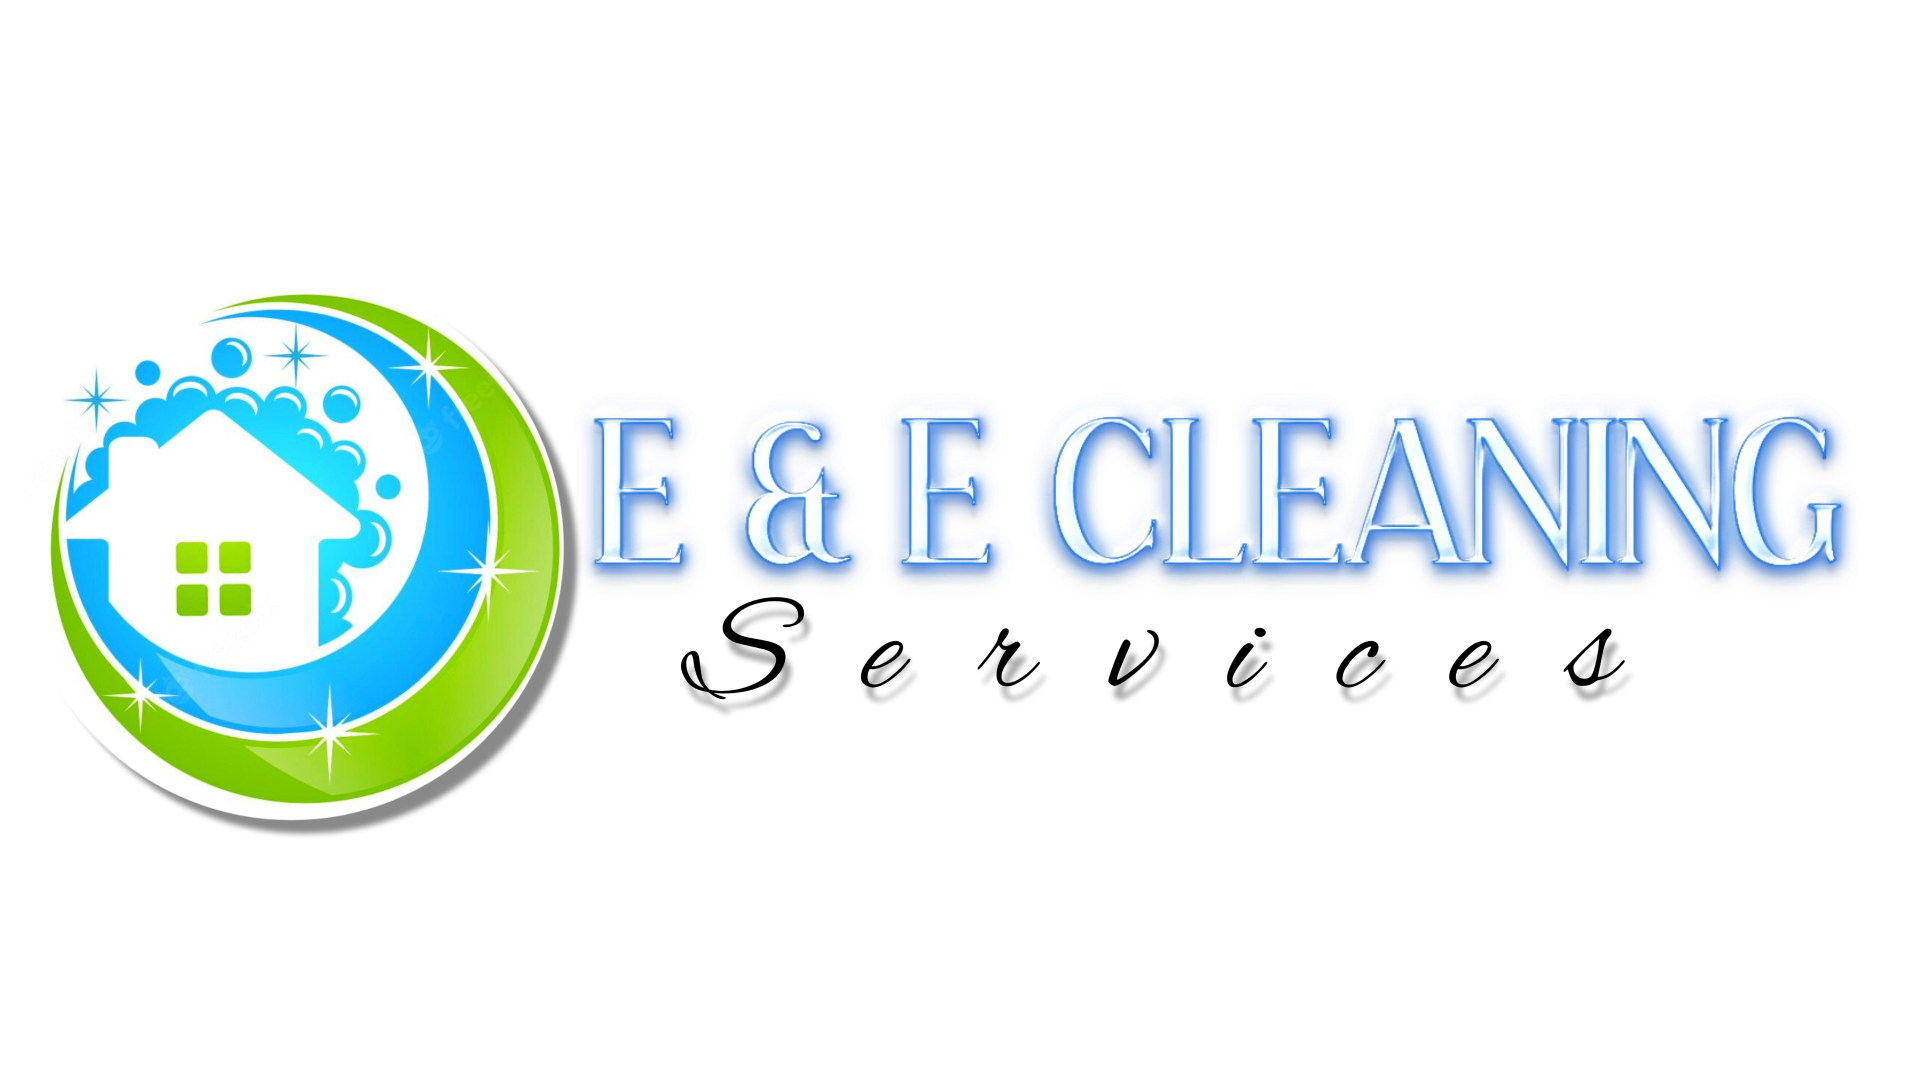 E & E Cleaning service official logo